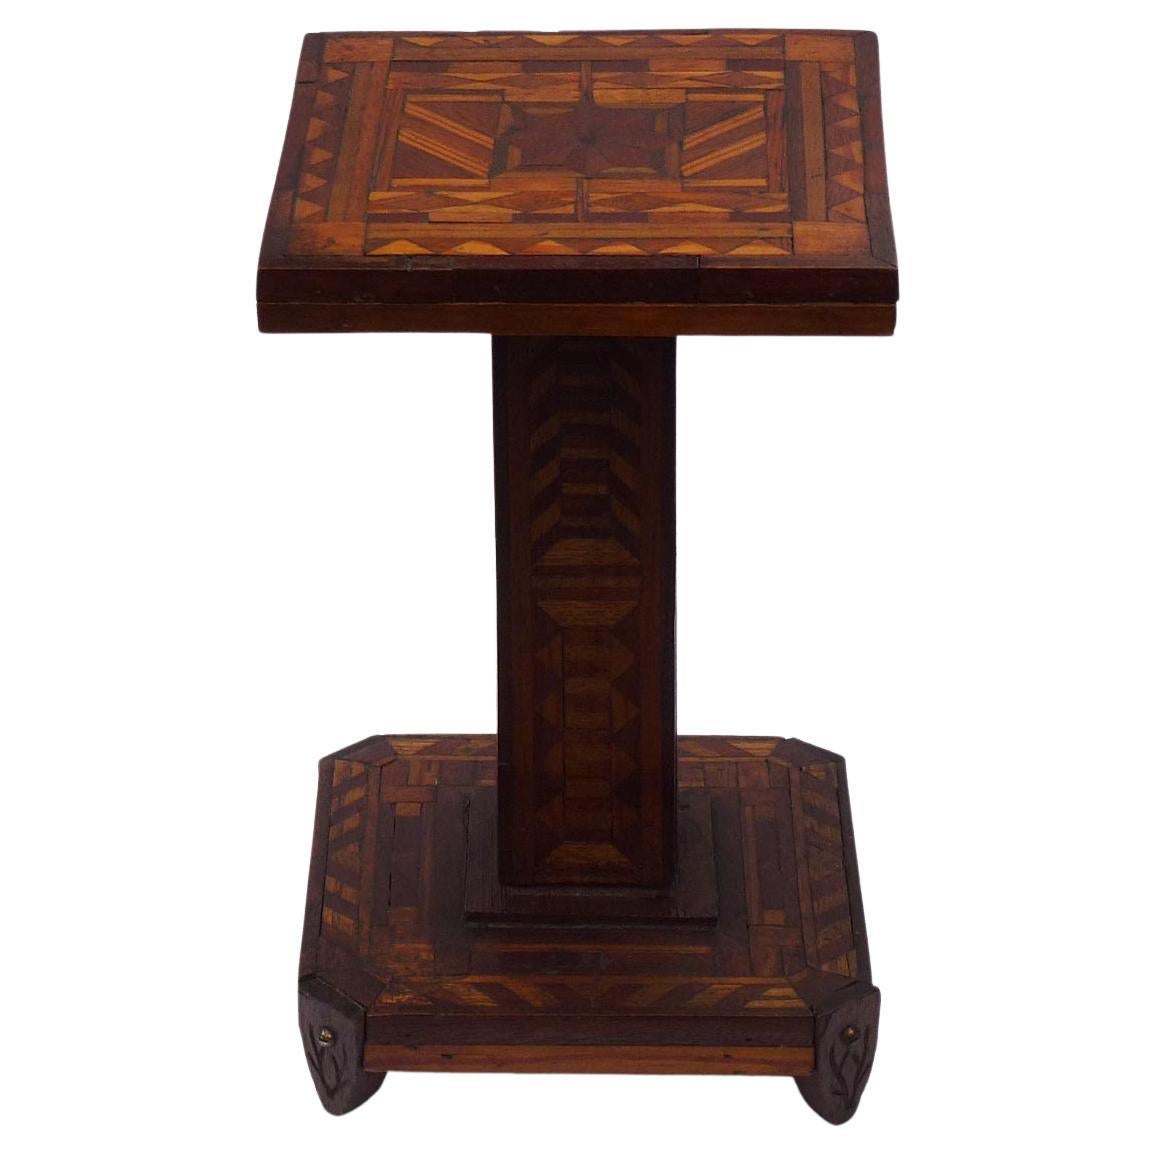 Very Intricate Small Marquetry Pedestal Stand, Each Side Is Done Differently